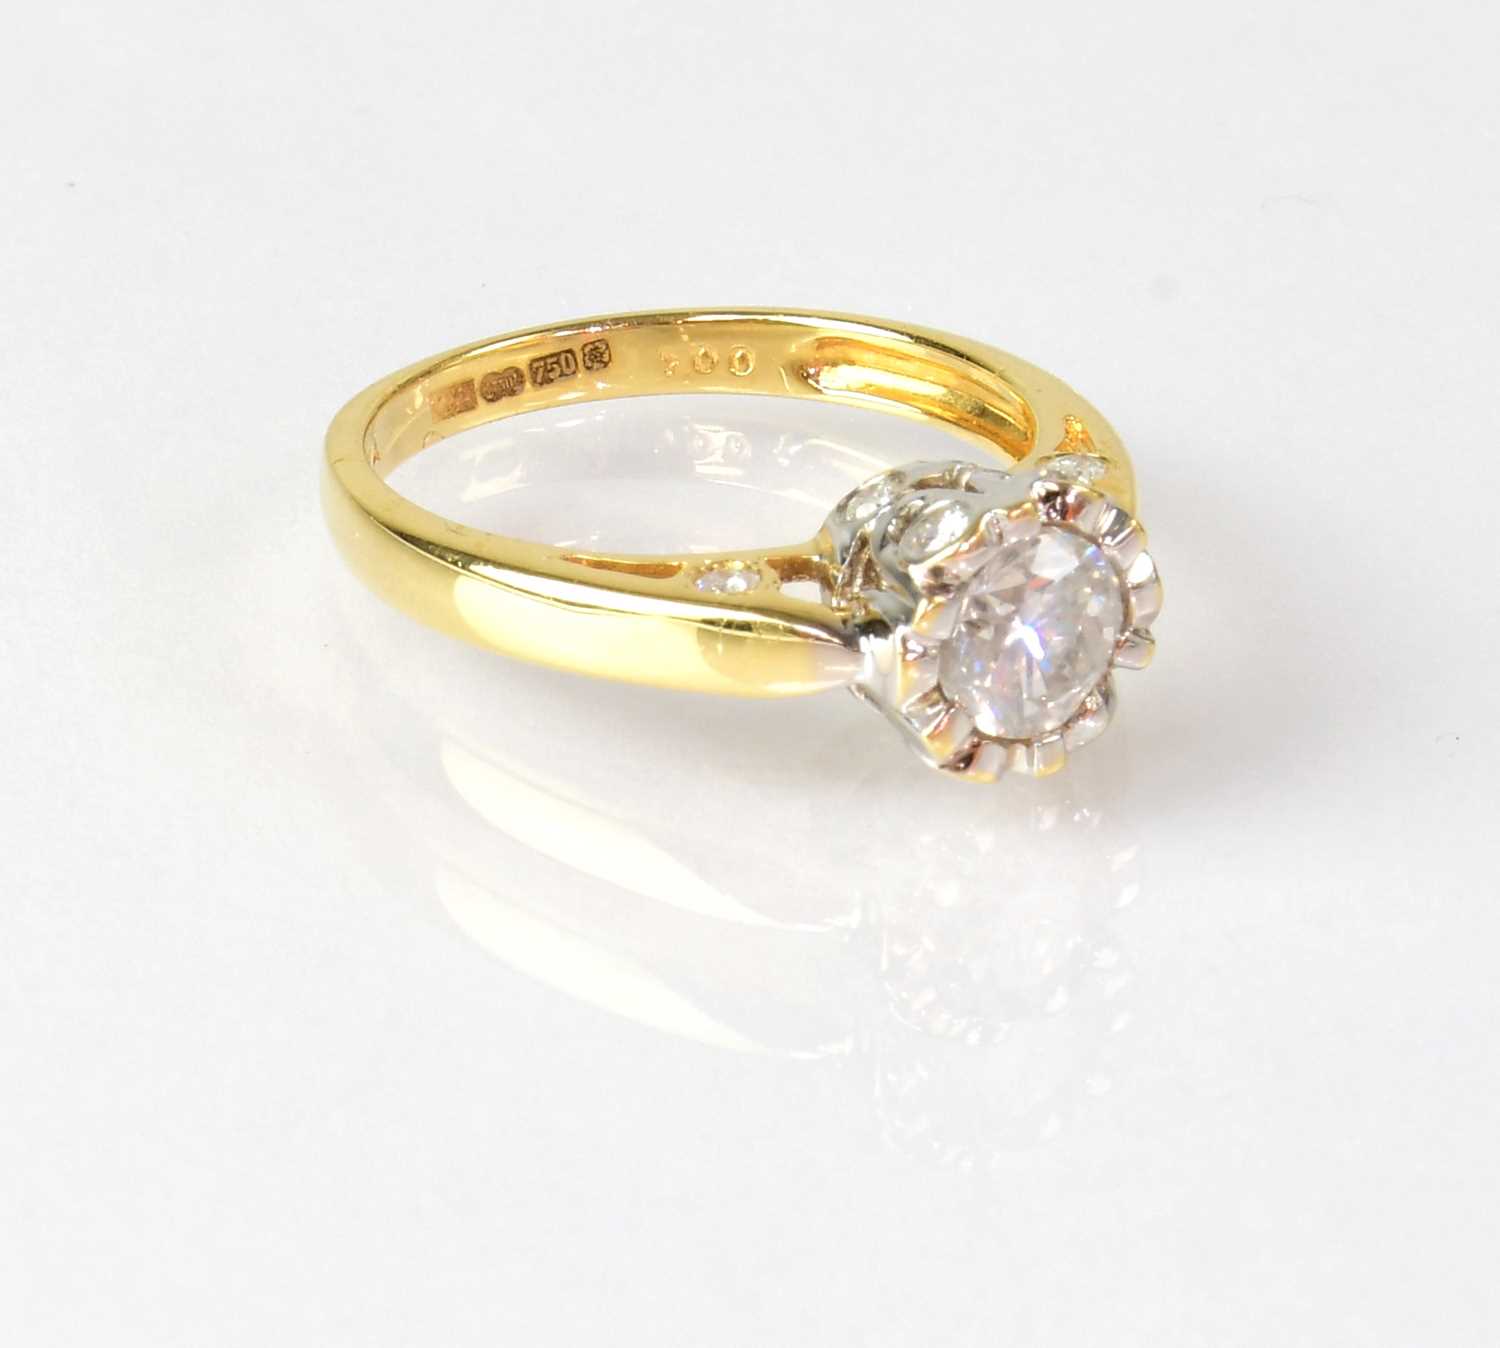 An 18ct yellow gold solitaire diamond ring, the stone in an unusual setting, set with smaller - Image 2 of 3